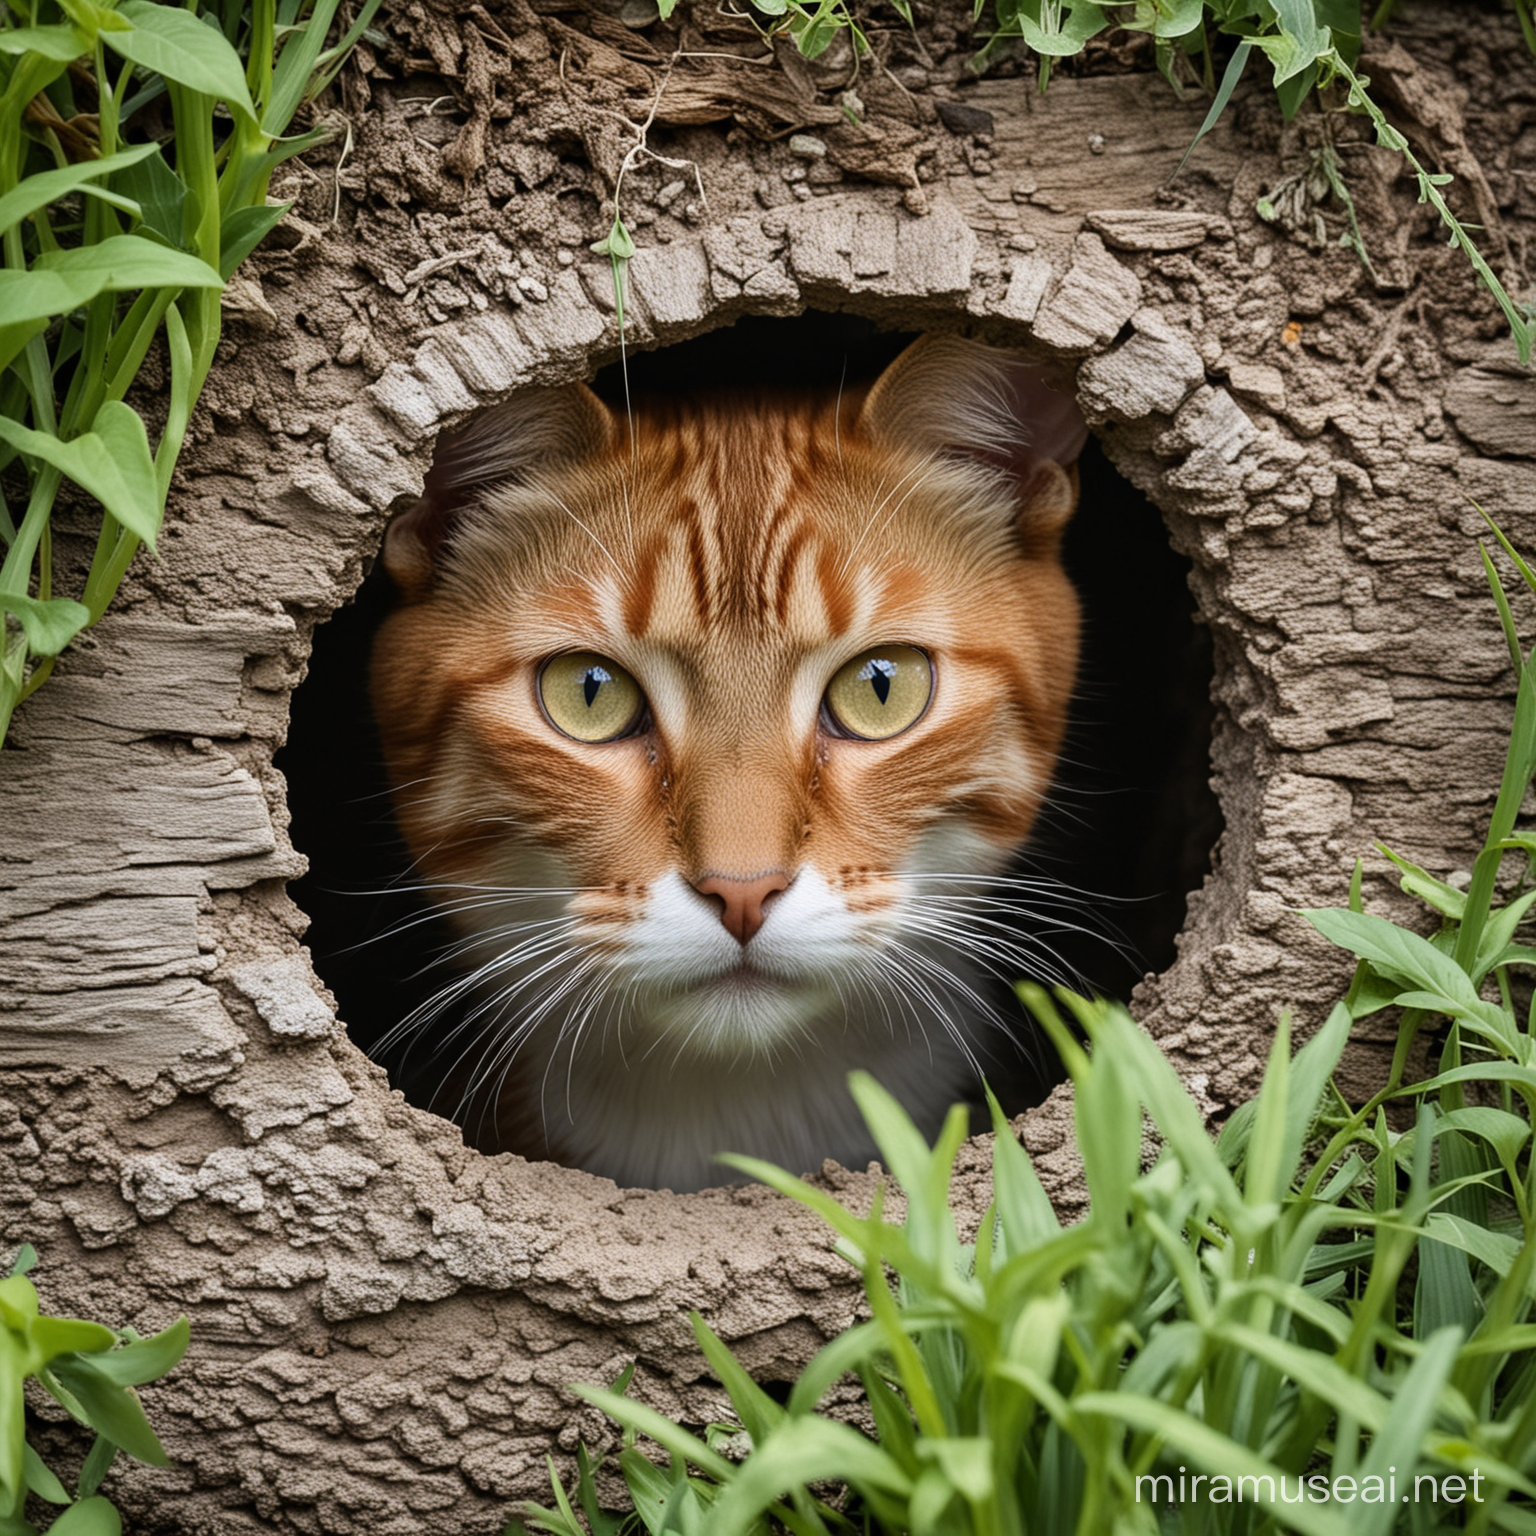 the cat peeks through the hole in the garden
